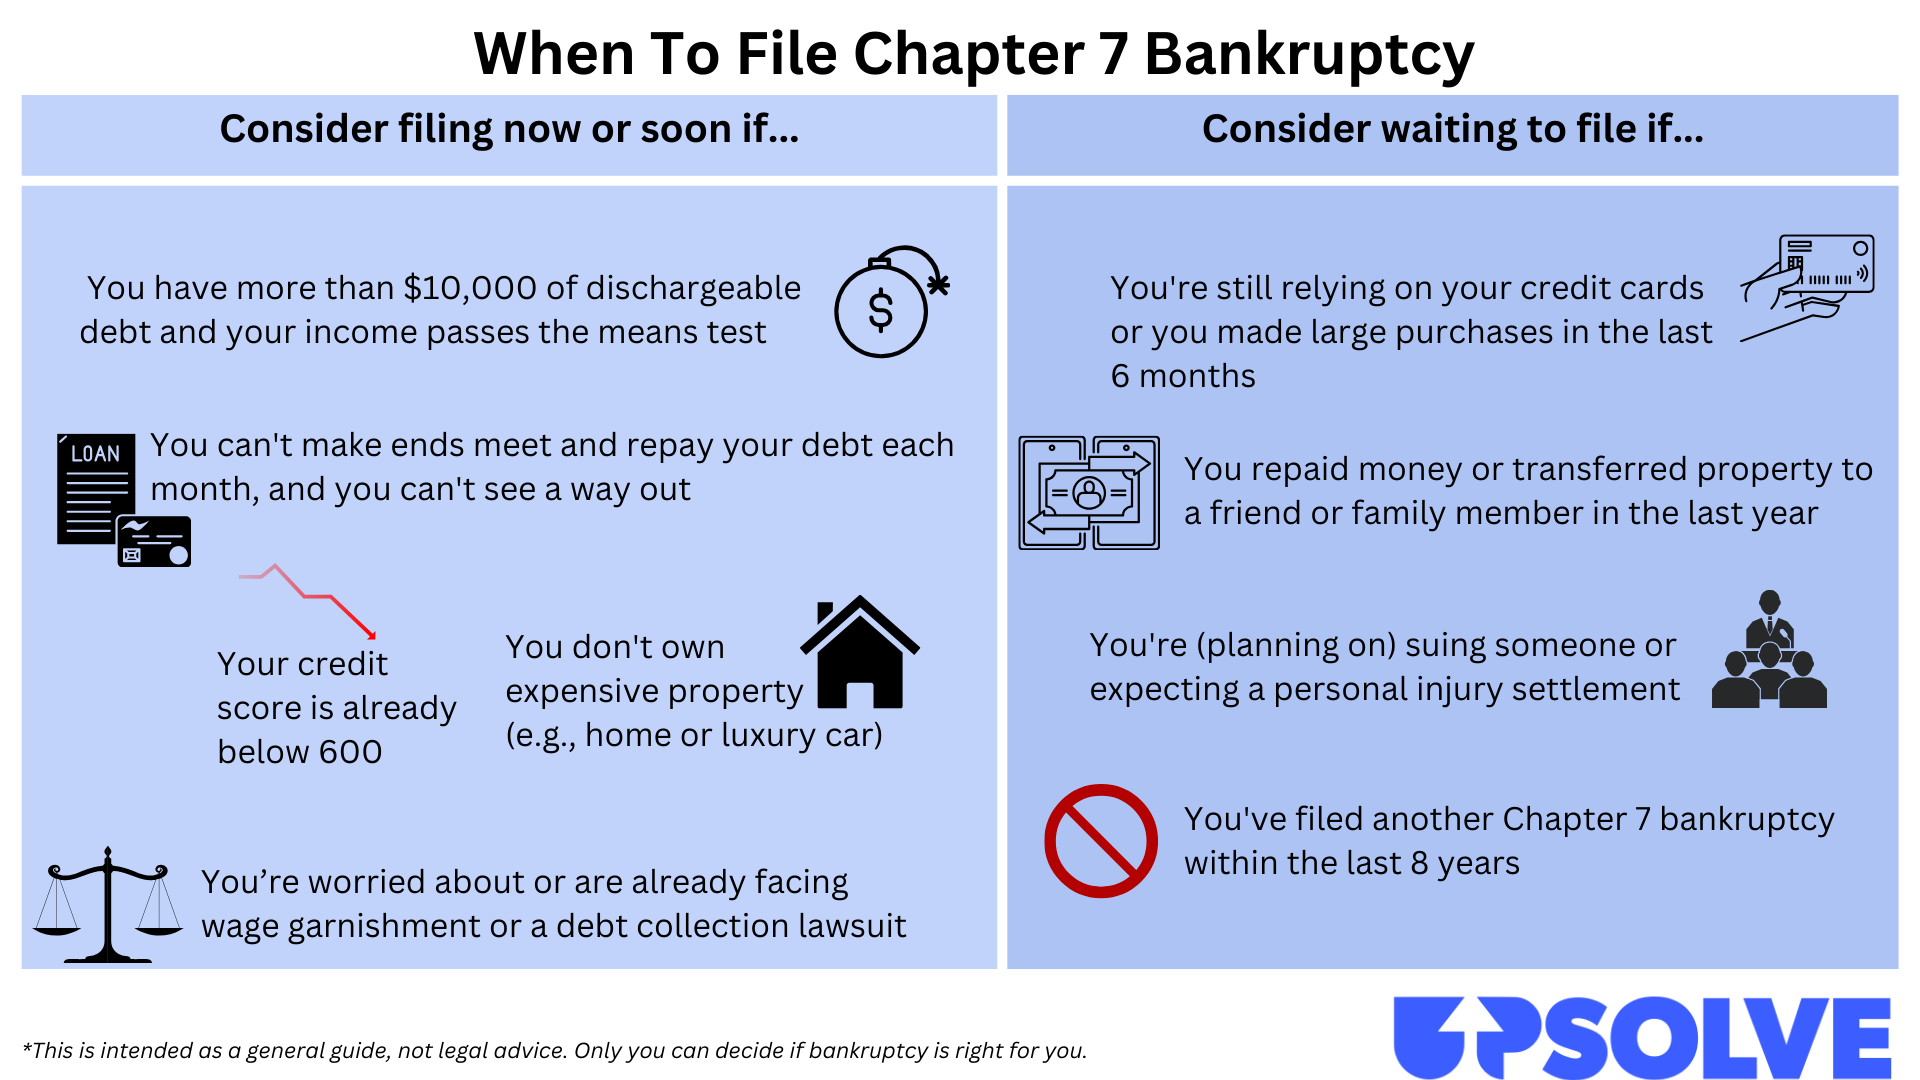 Infographic explaining the major factors to consider regarding the timing of filing Chapter 7 bankruptcy.